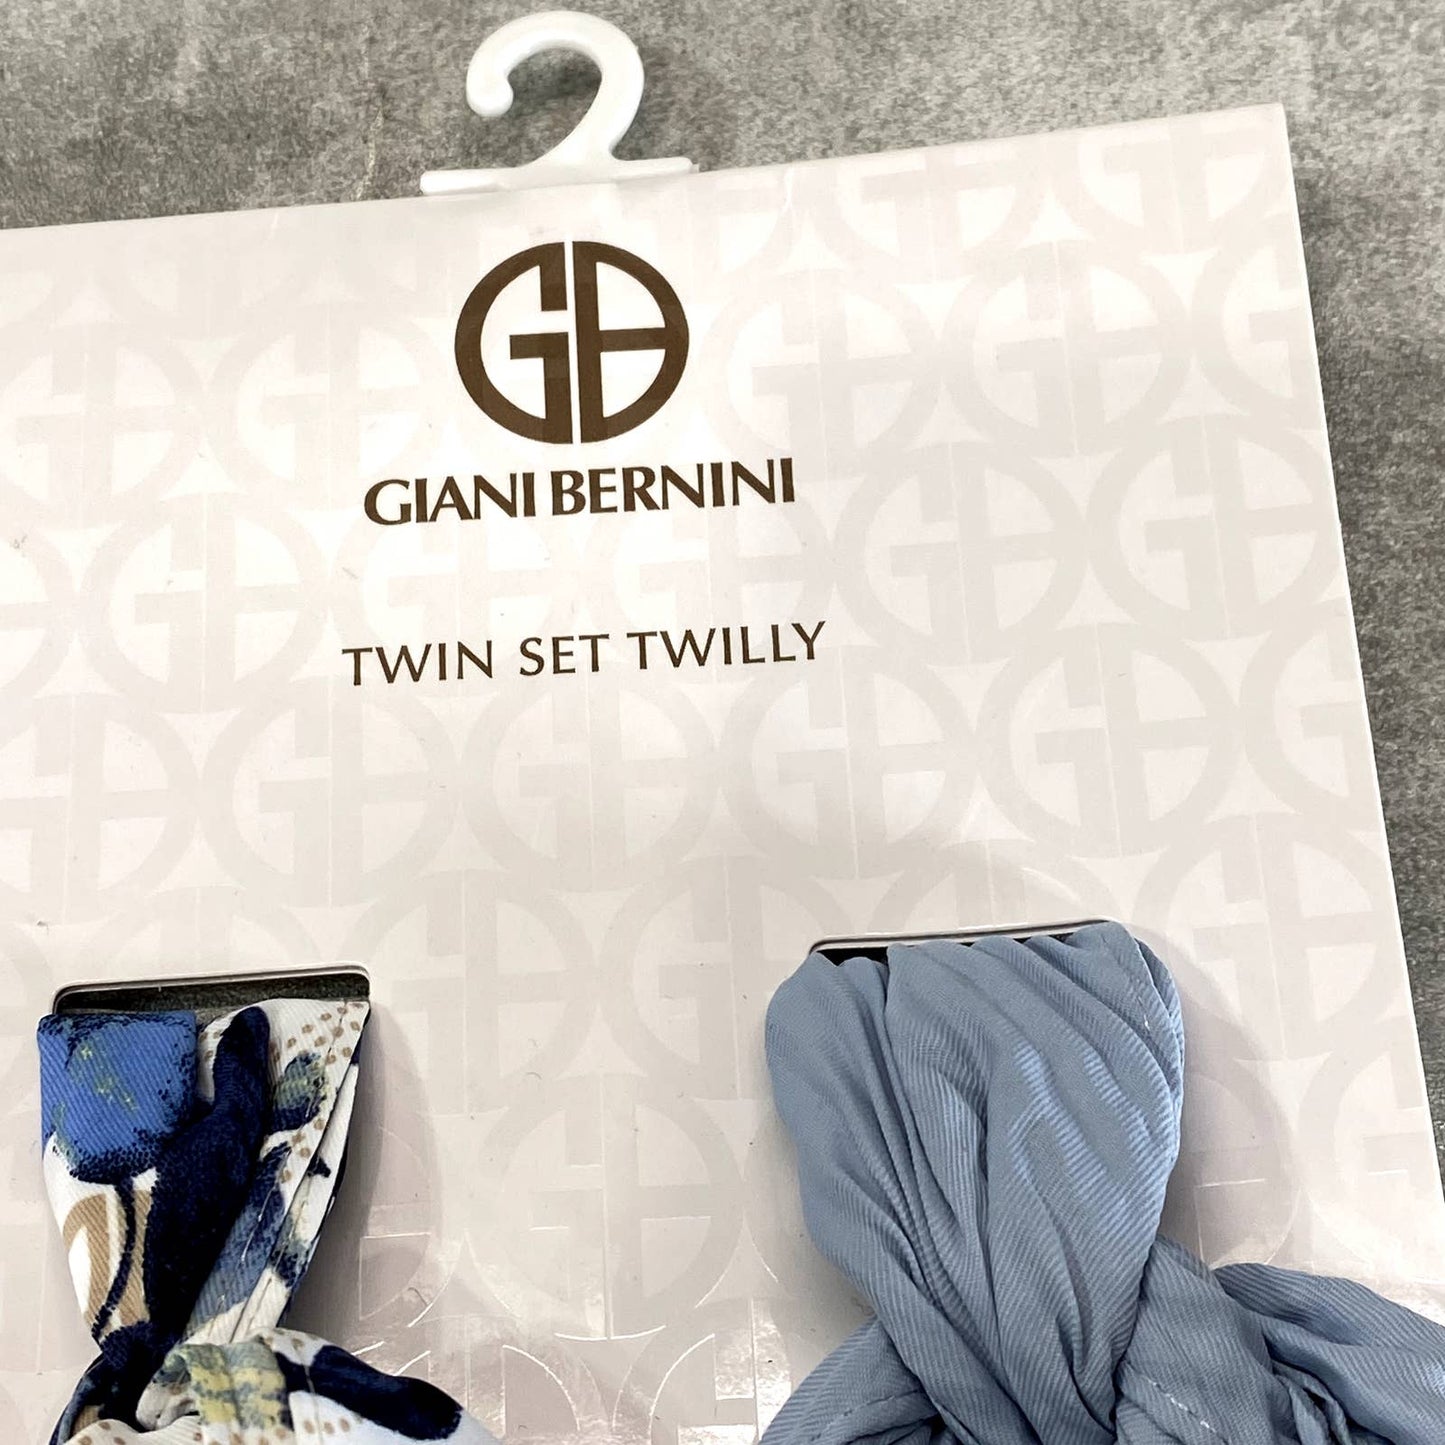 GIANI BERNINI Women's Neutral Blue Logo Floral & Solid Twin Set Twilly Scarves